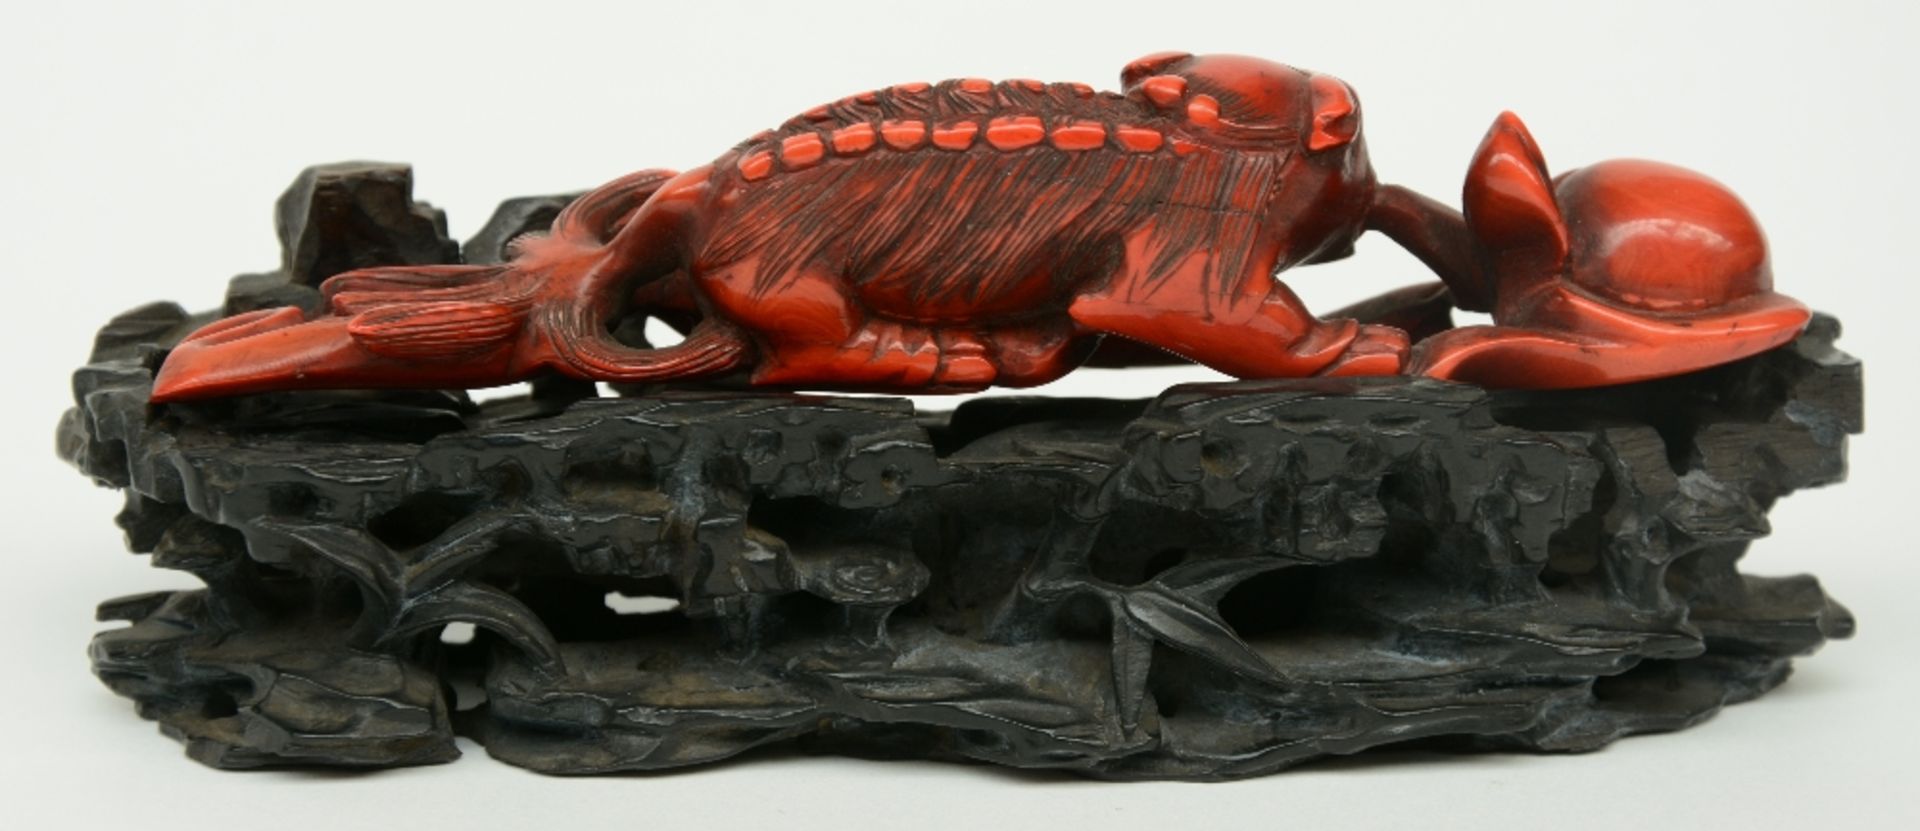 A Chinese monochrome red ivory sculpture depicting a mythological animal, on a wooden base, 19thC, H - Bild 3 aus 8